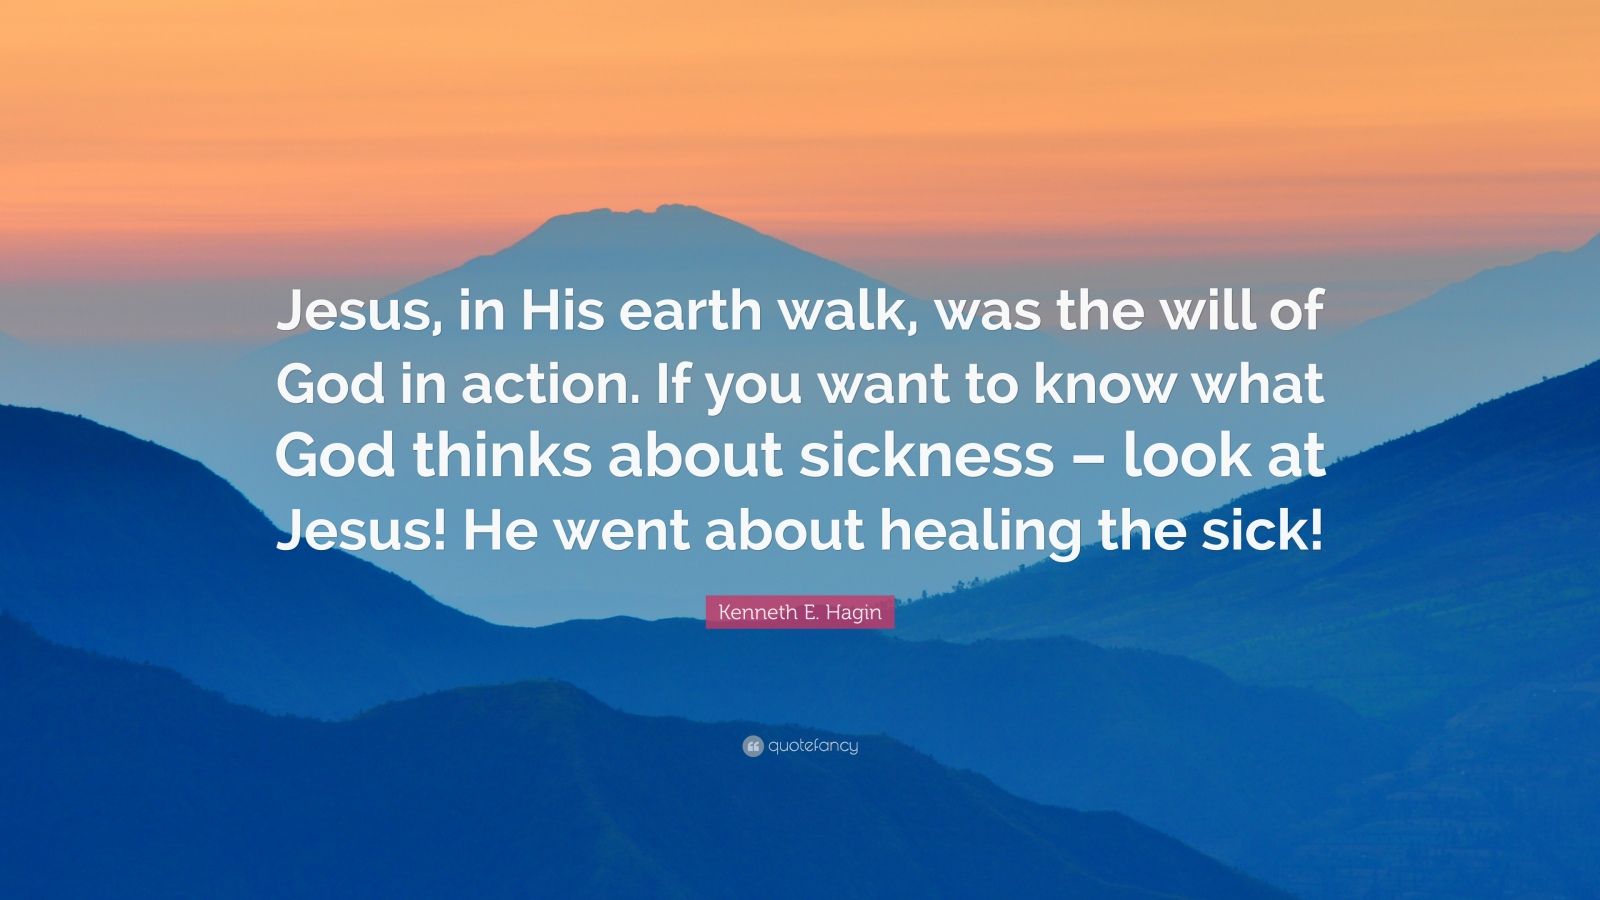 kenneth hagin healing quotes